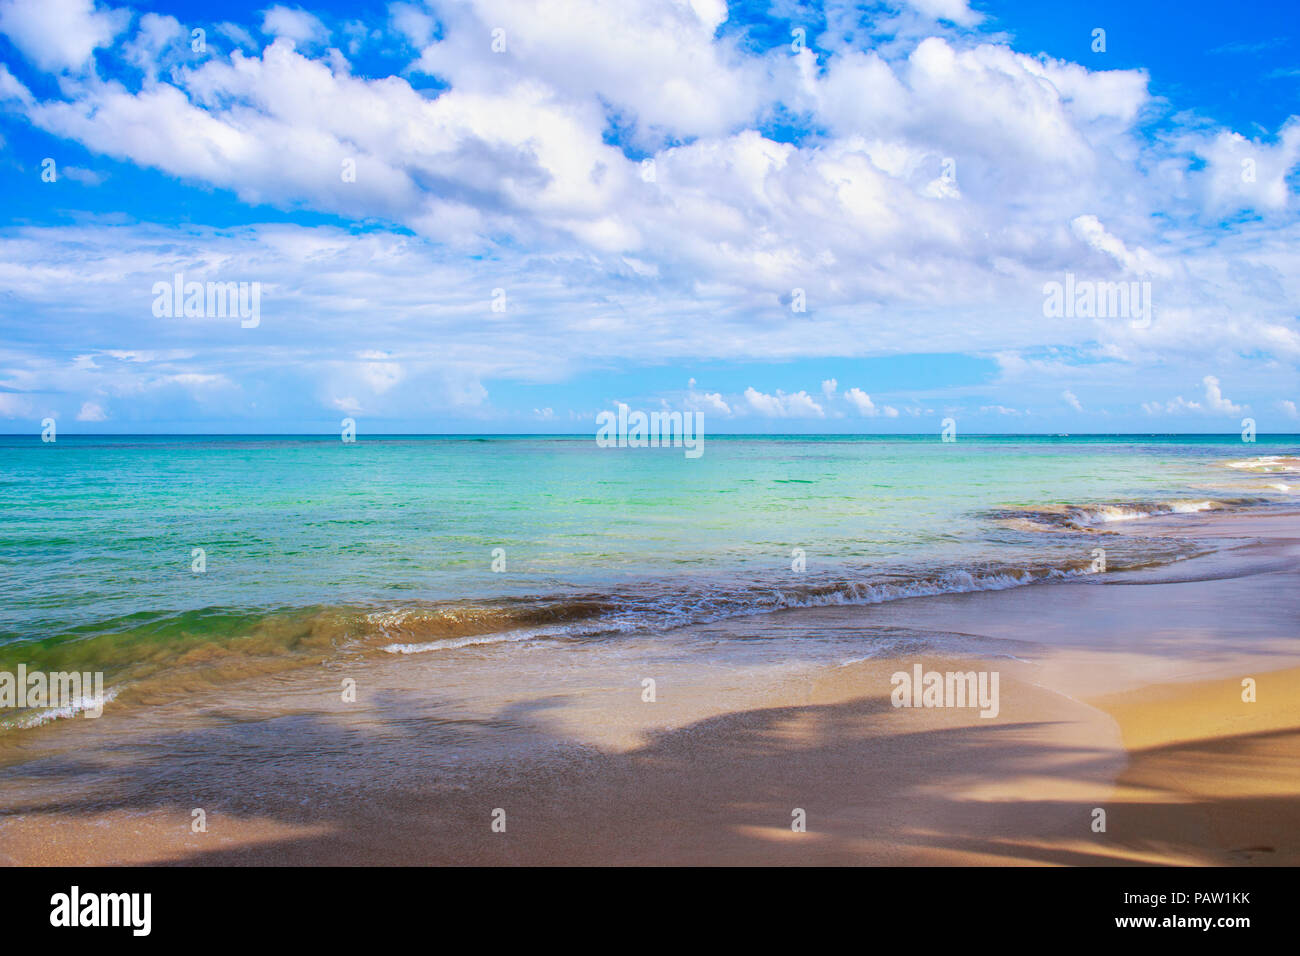 Ideal vacation. Perfect beach in Dominican Republic. Blue sea, hight palm trees and blue sky Stock Photo